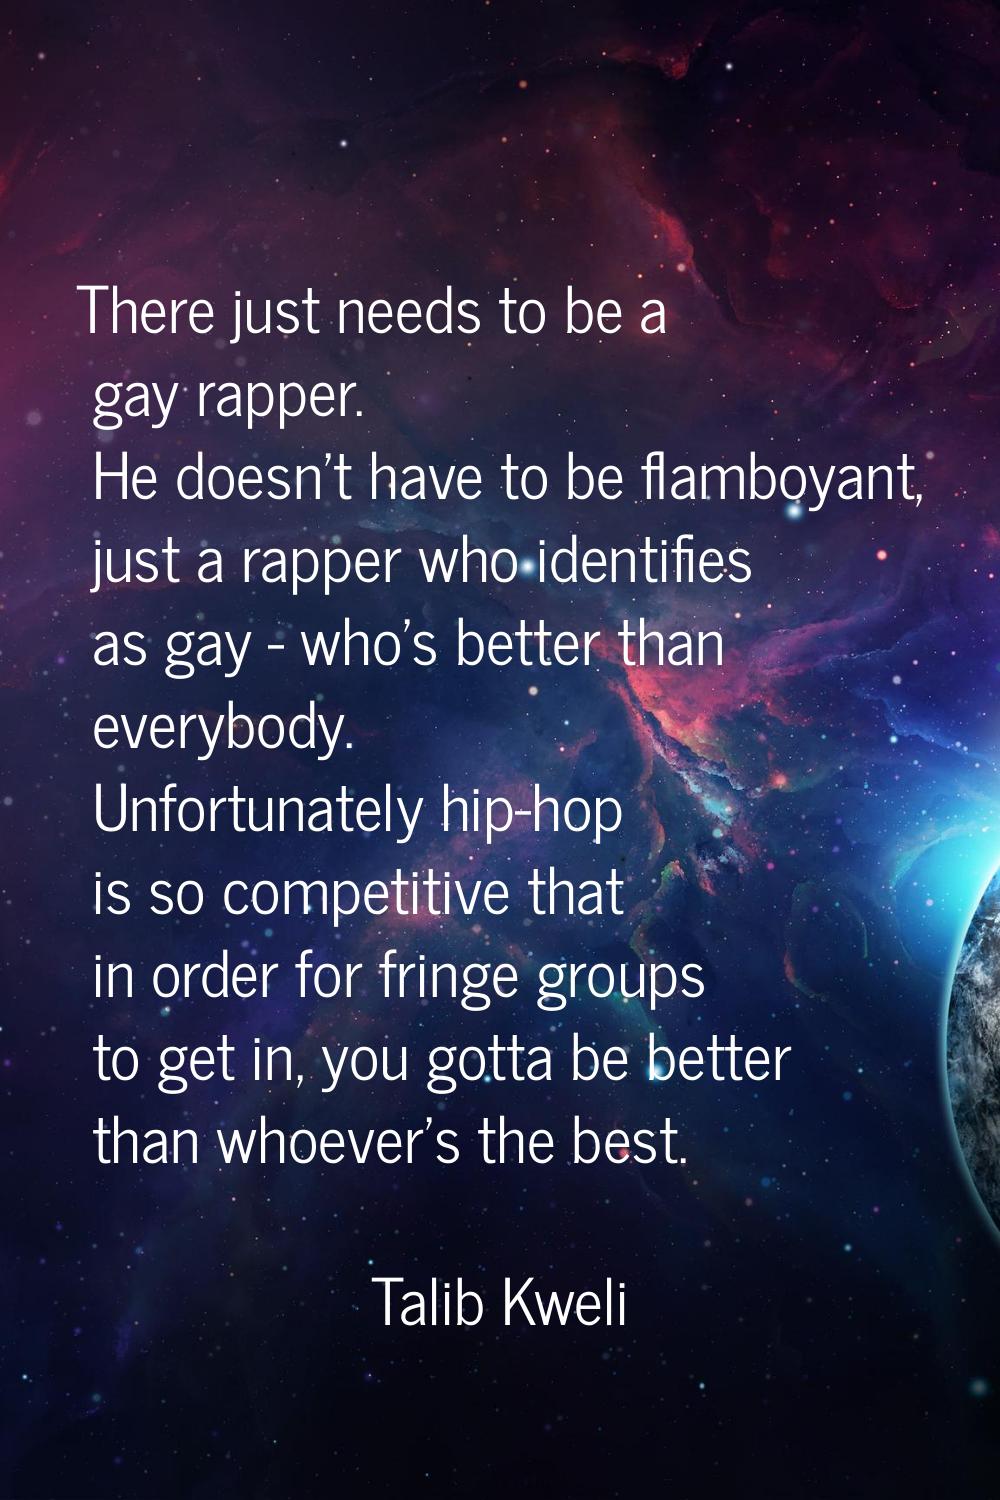 There just needs to be a gay rapper. He doesn't have to be flamboyant, just a rapper who identifies